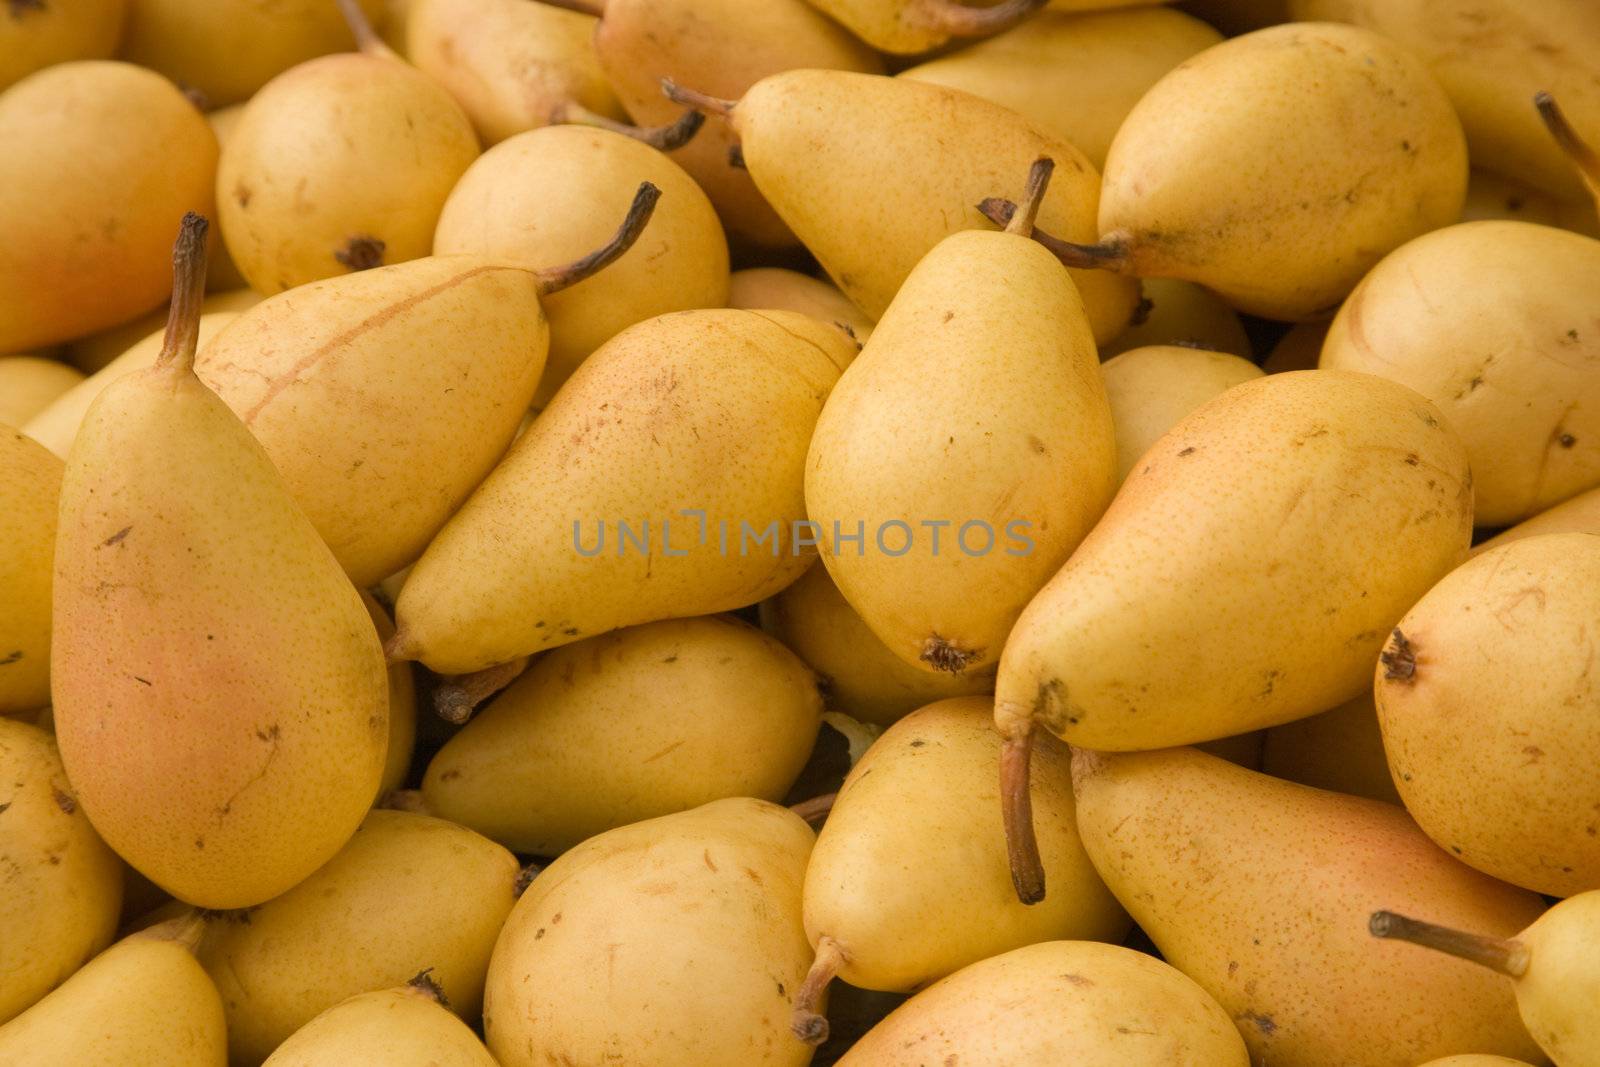 Yellow pears tiled on a market stall.